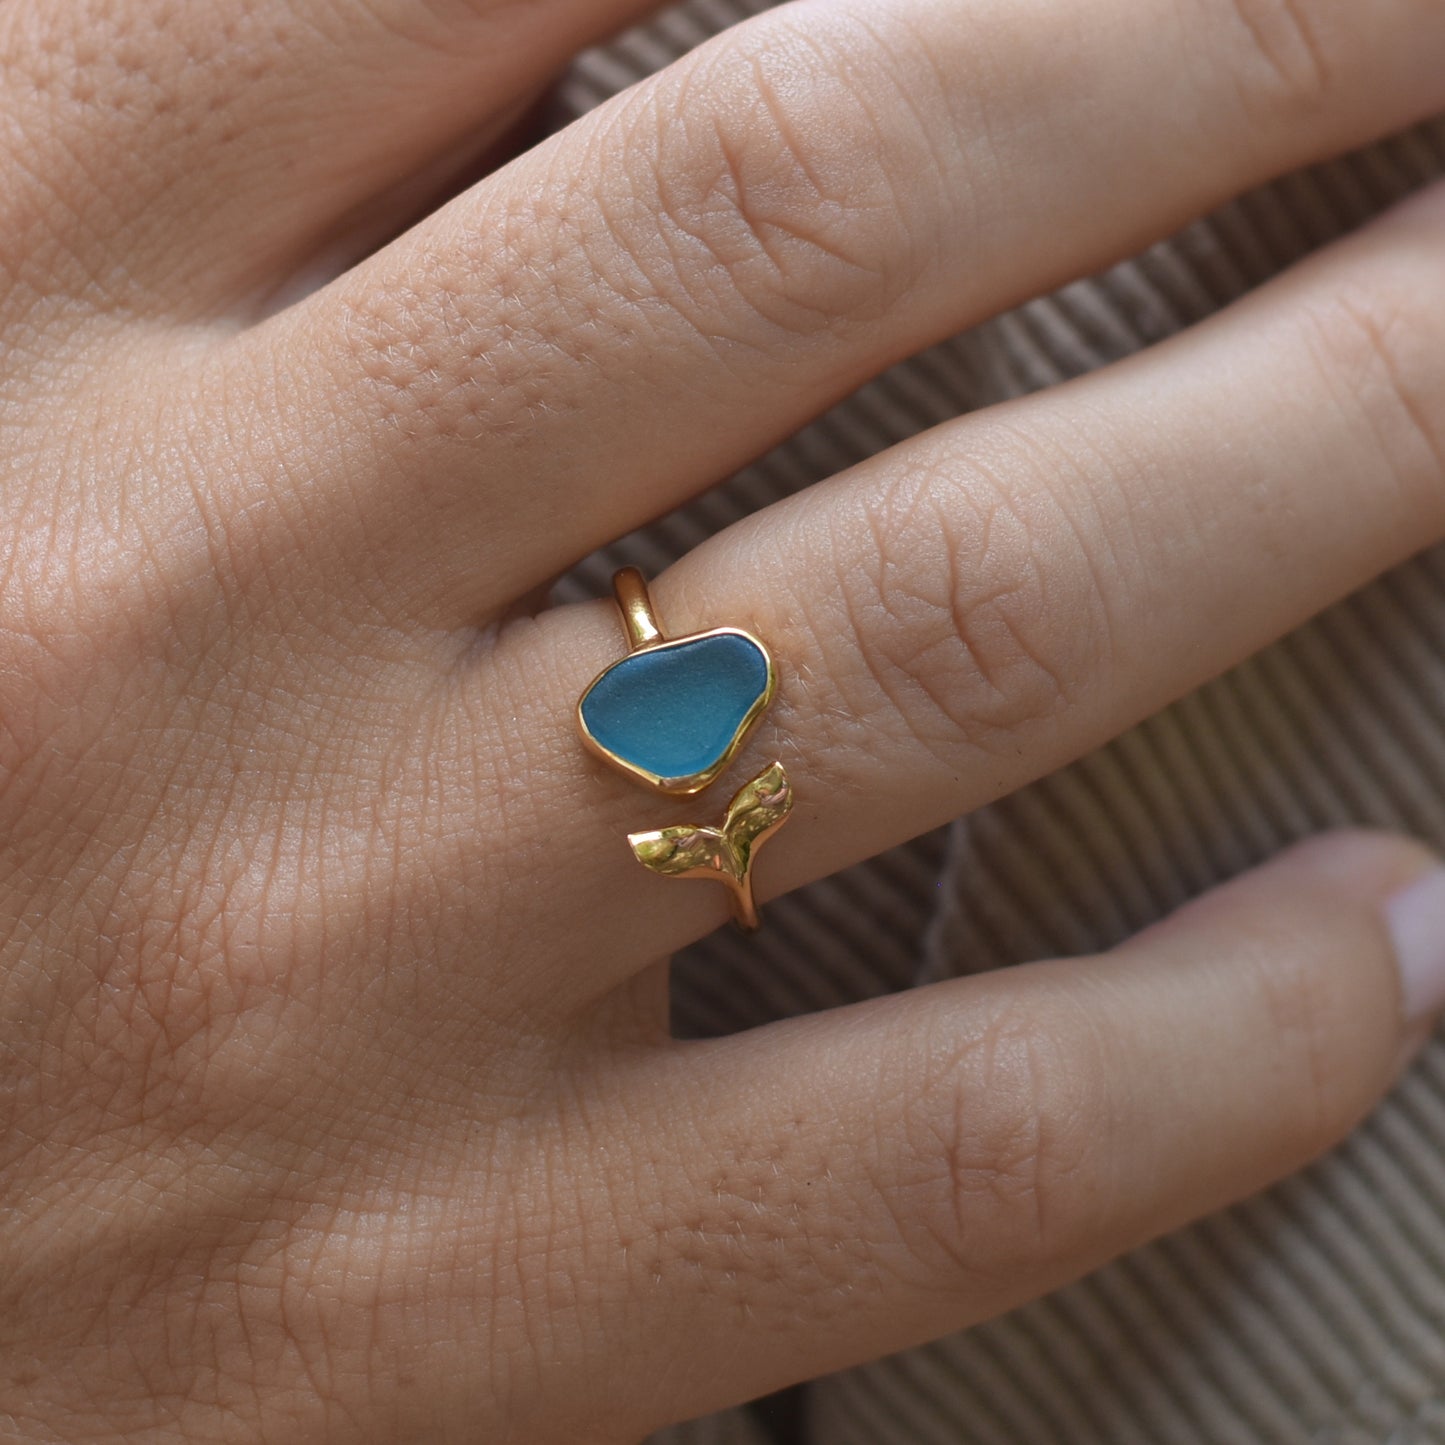 Mermaid Beach Glass Ring in 24k gold-plated silver